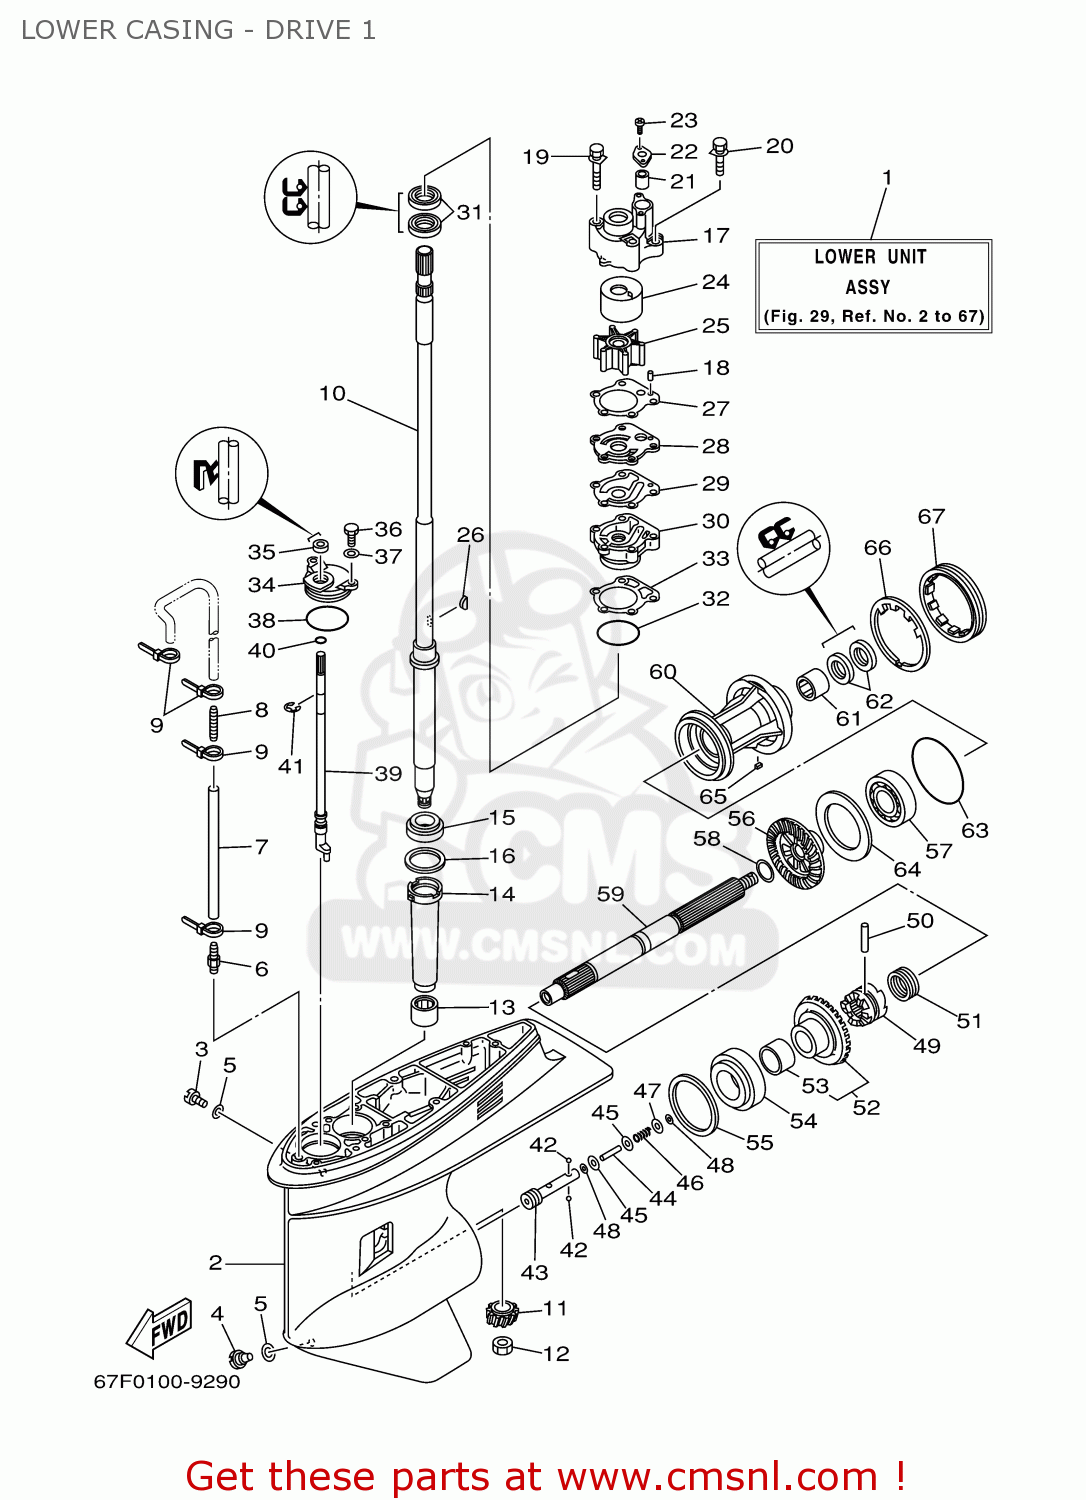 Yamaha F80/f100tlry 2000 Lower Casing - Drive 1 - schematic partsfiche